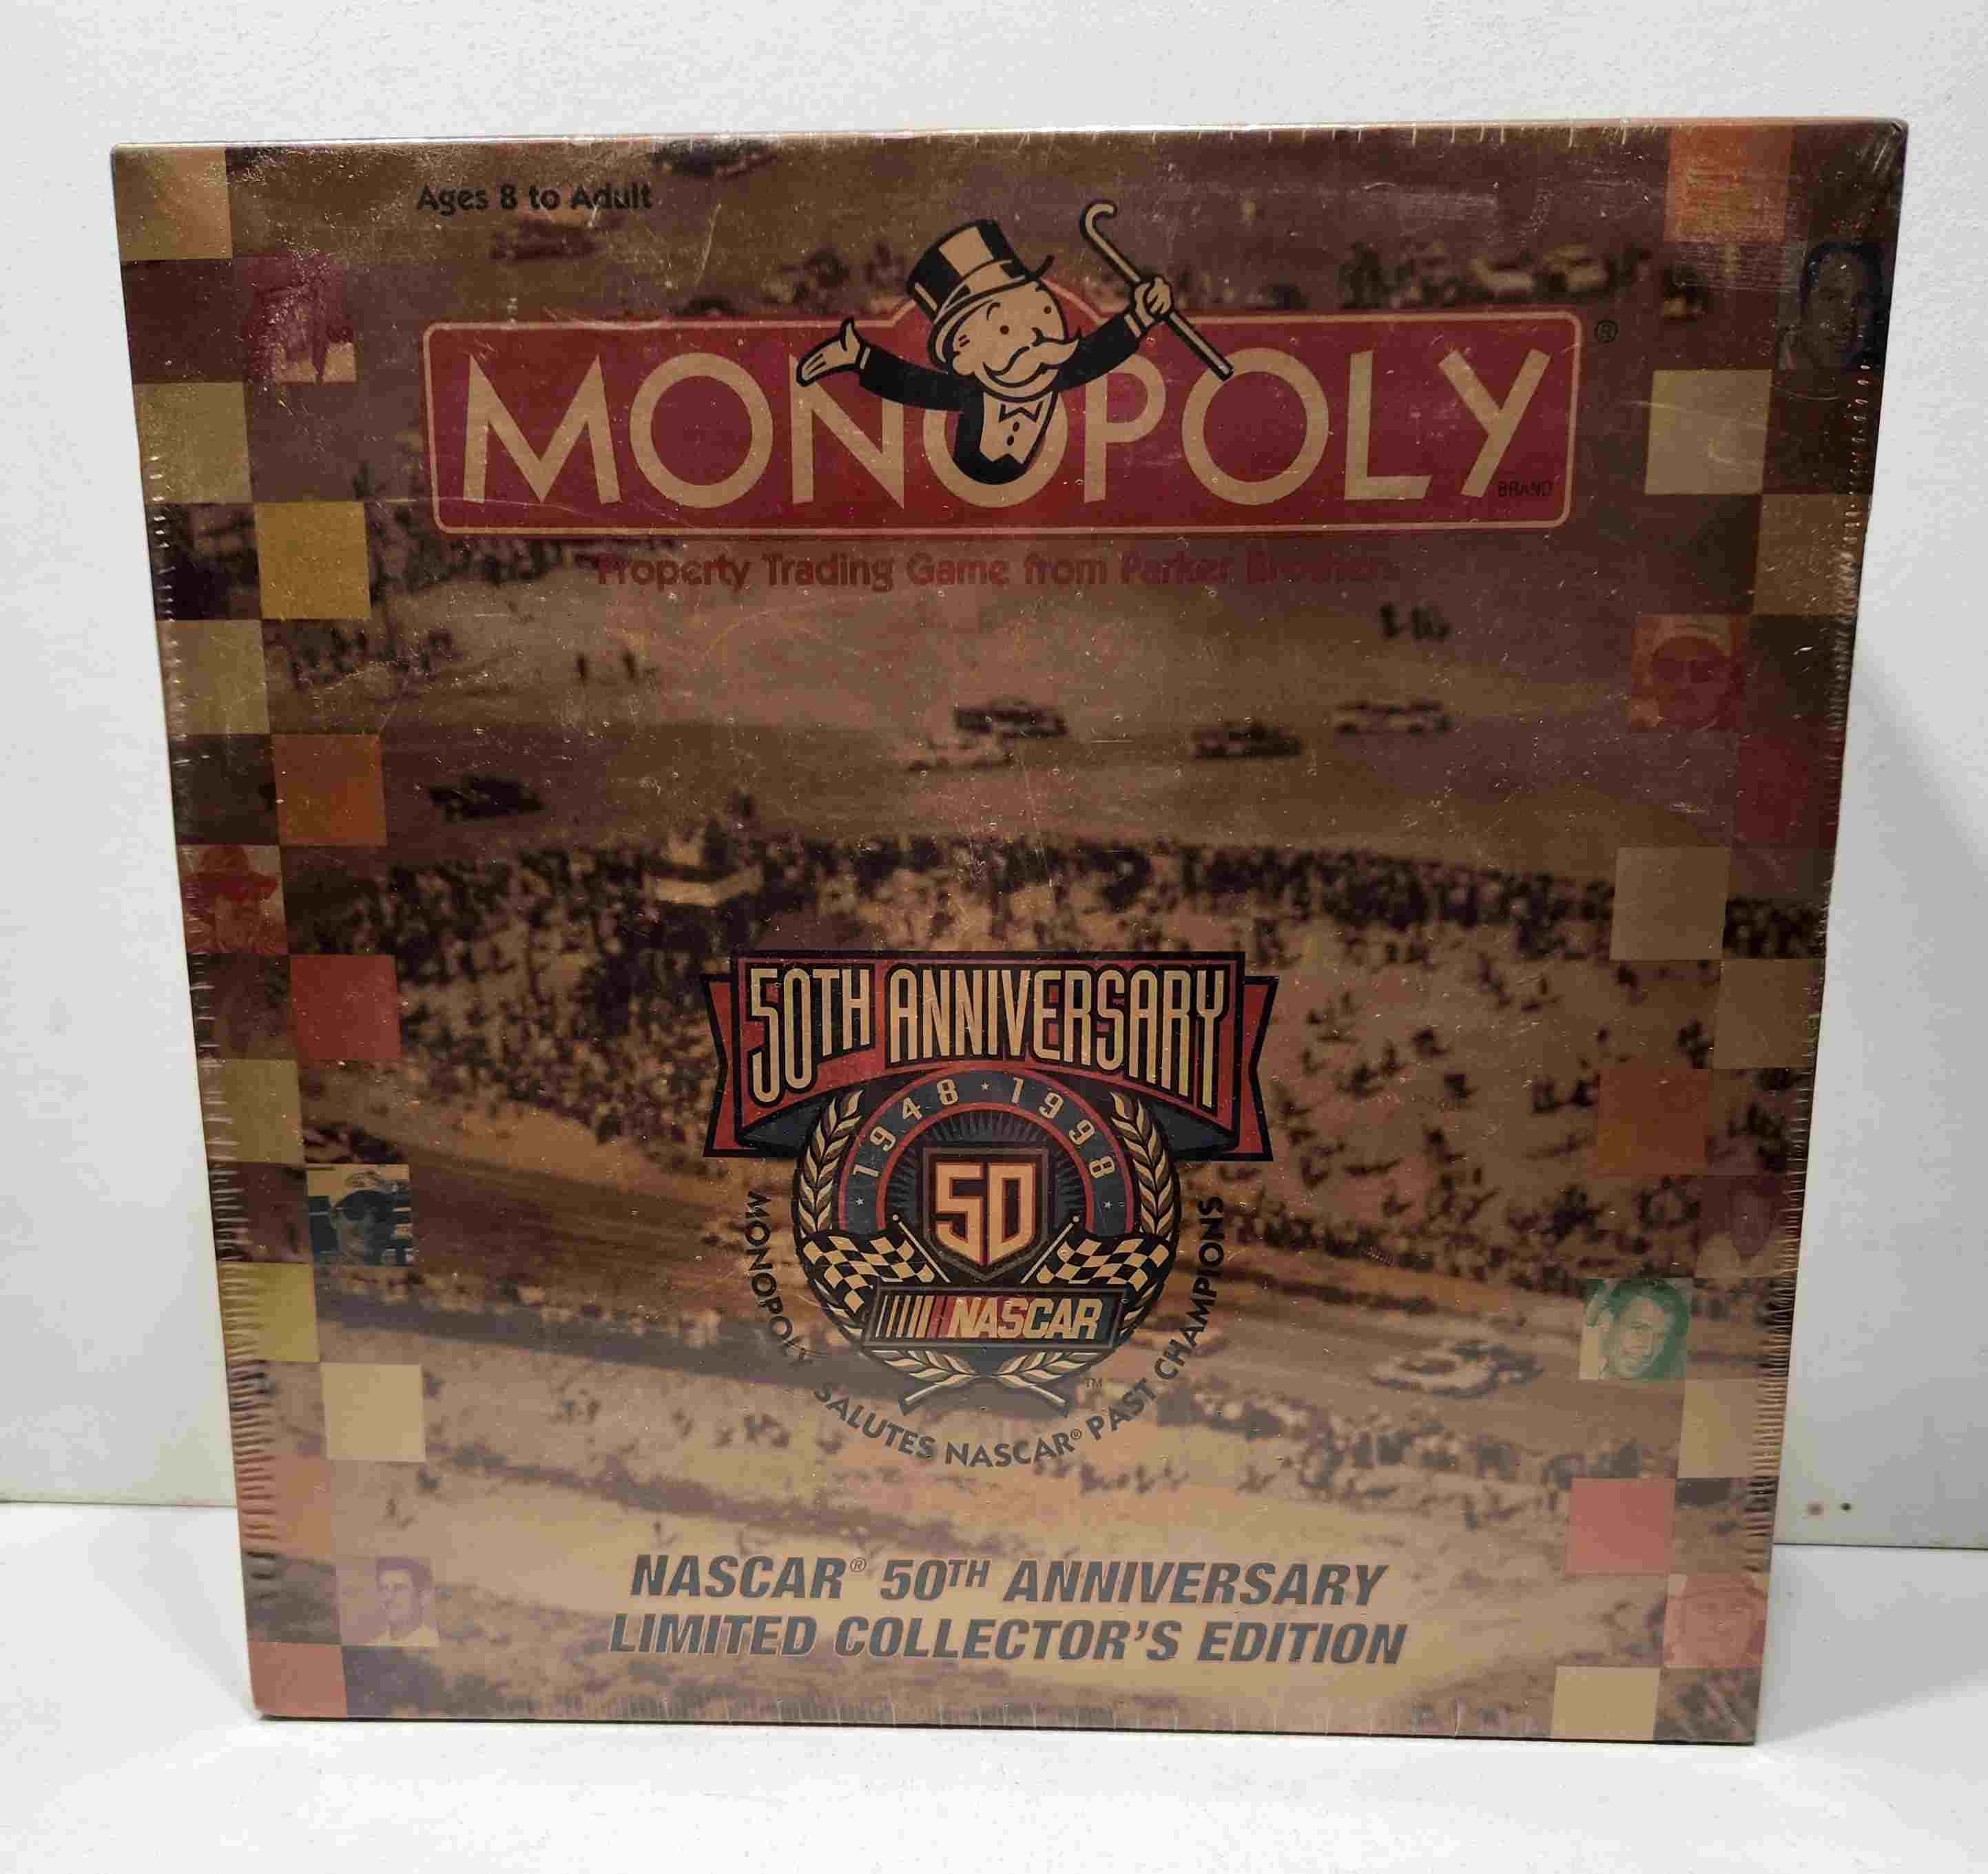 1998 NASCAR 50th Anniversary Limited Collector's Edition Monopoly